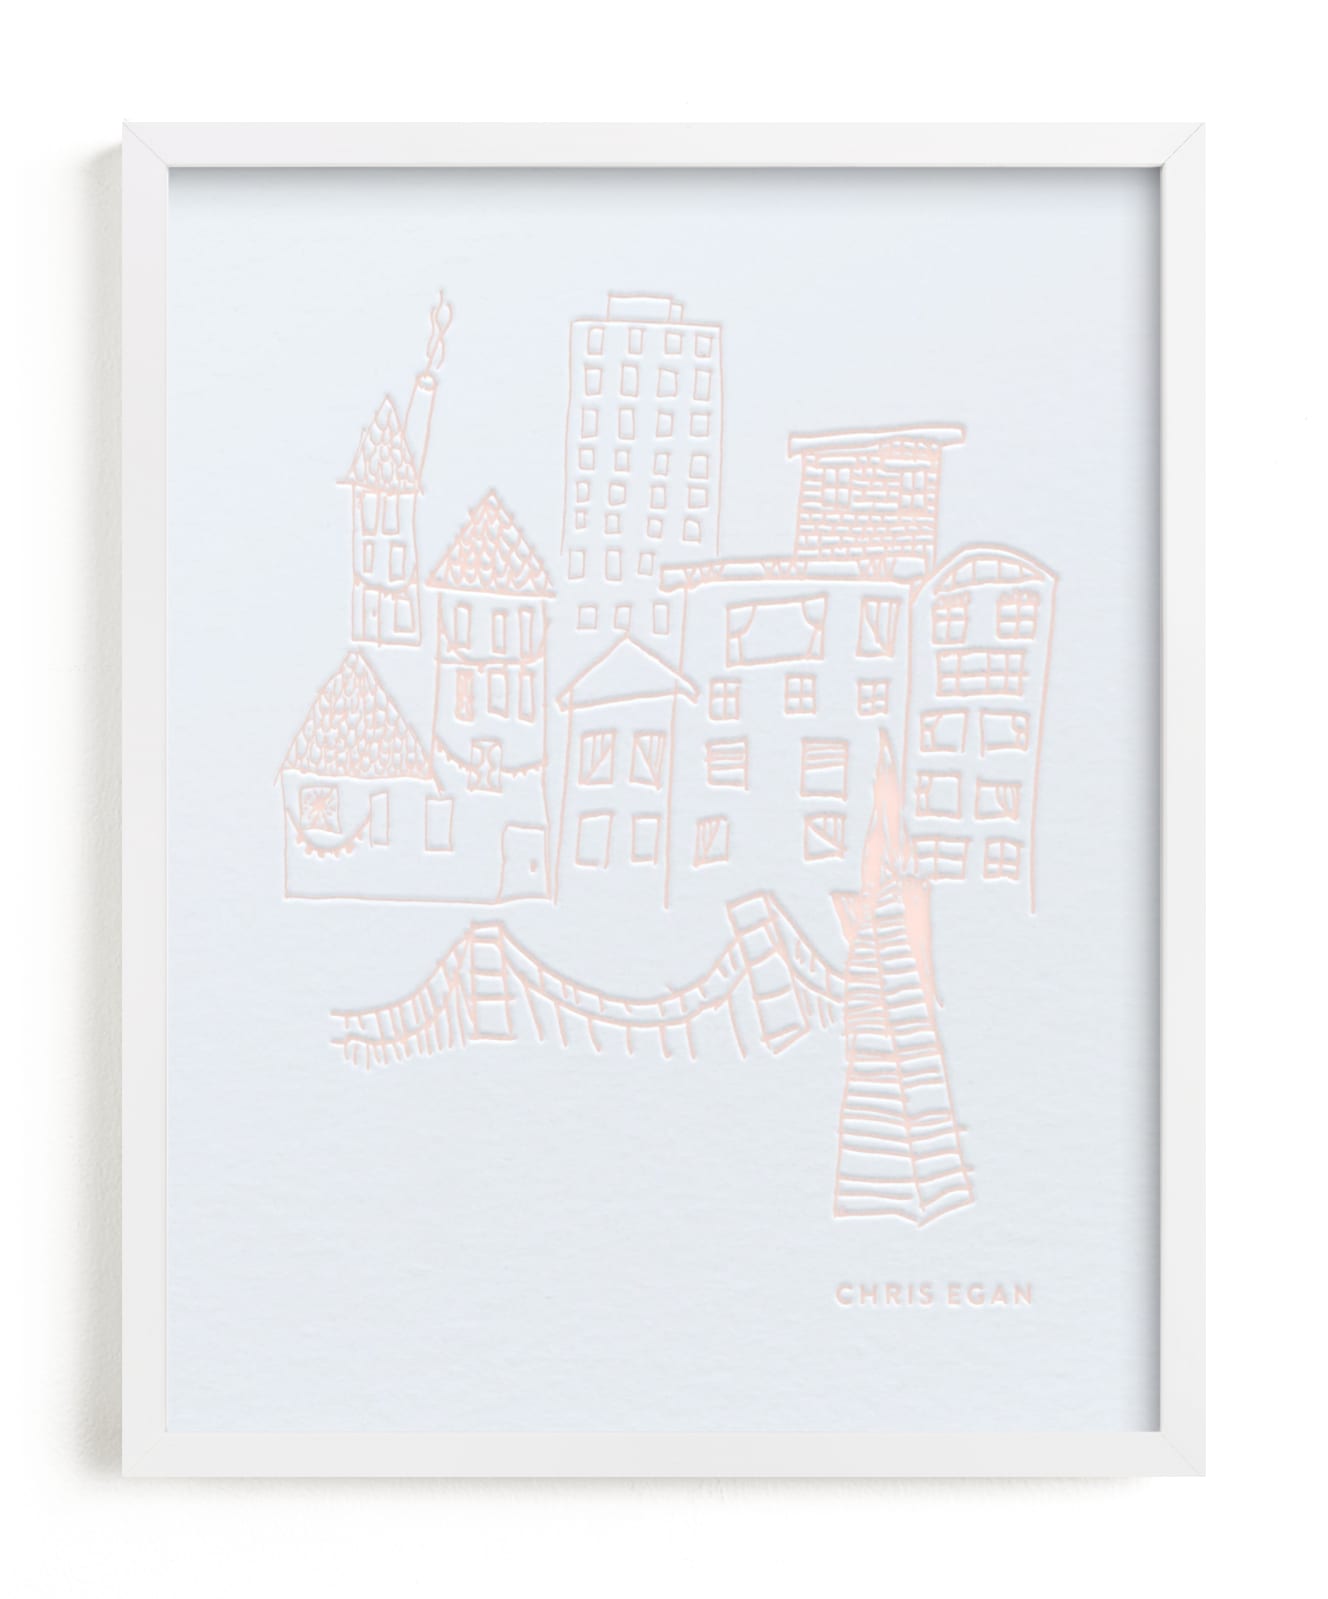 This is a pink photos to art by Minted called Your Drawing as Letterpress Art Print.